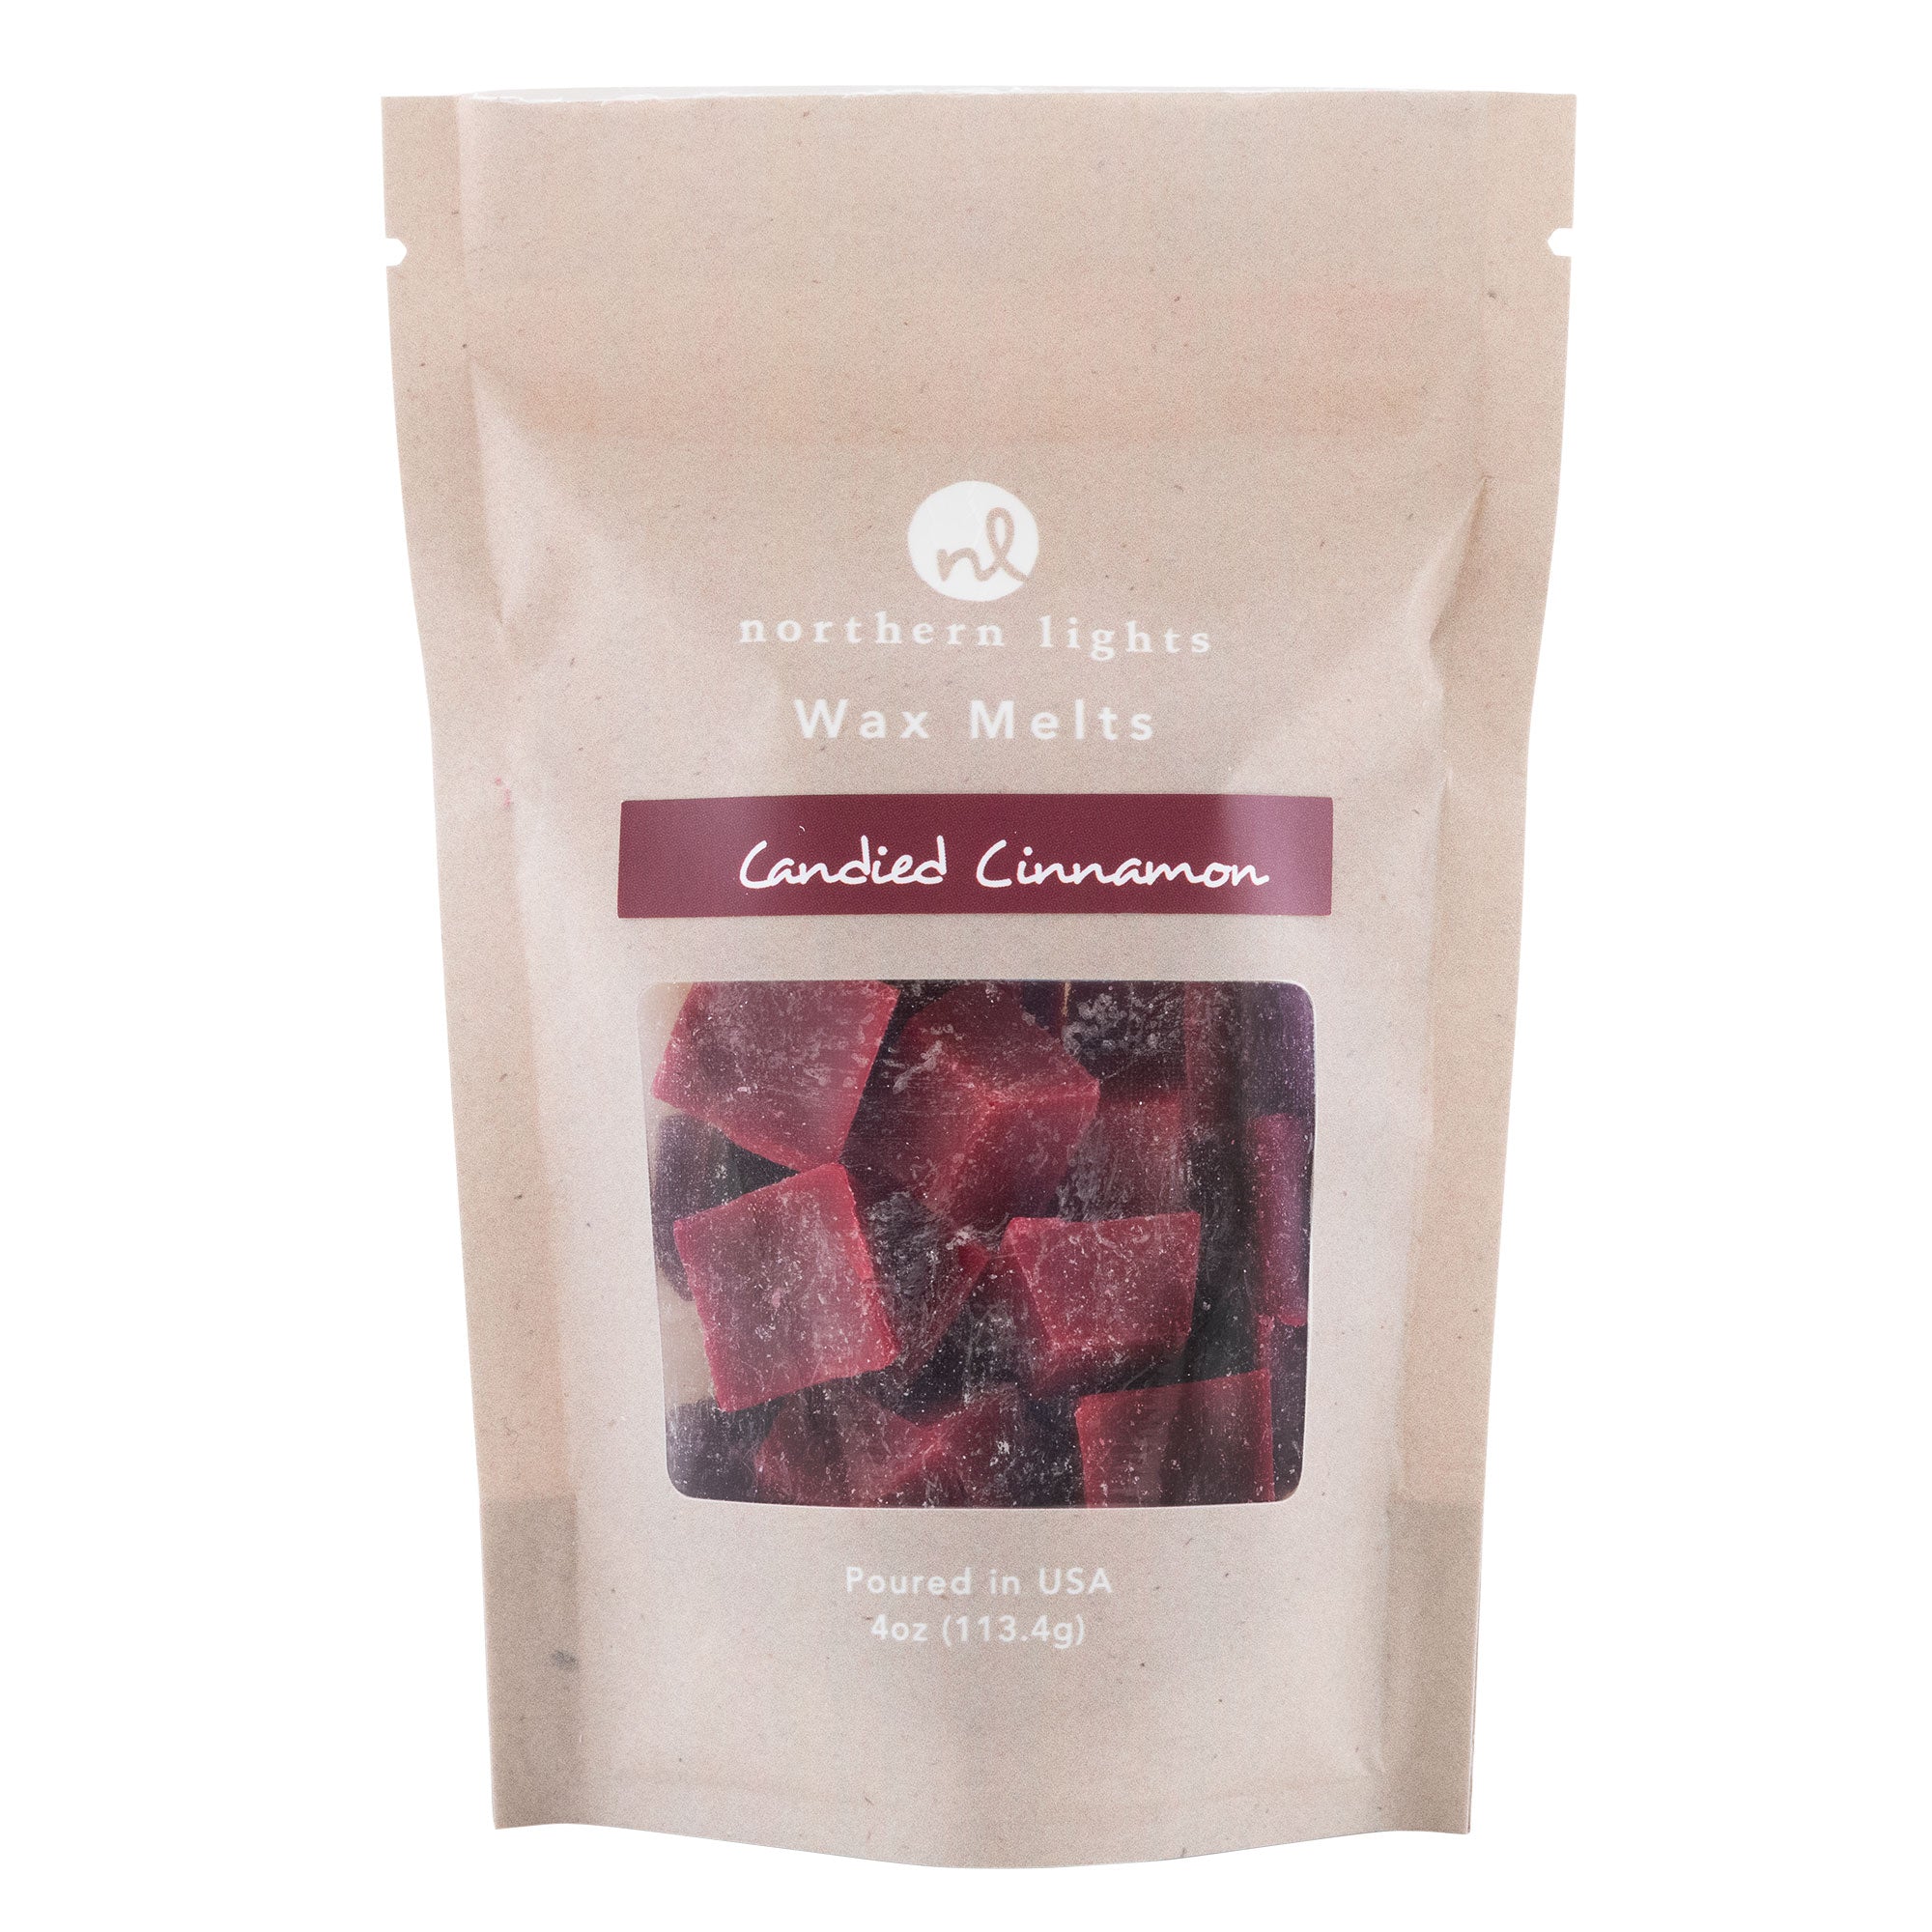 Candied Cinnamon by Northern Lights Wax Melts Pouch 4 oz